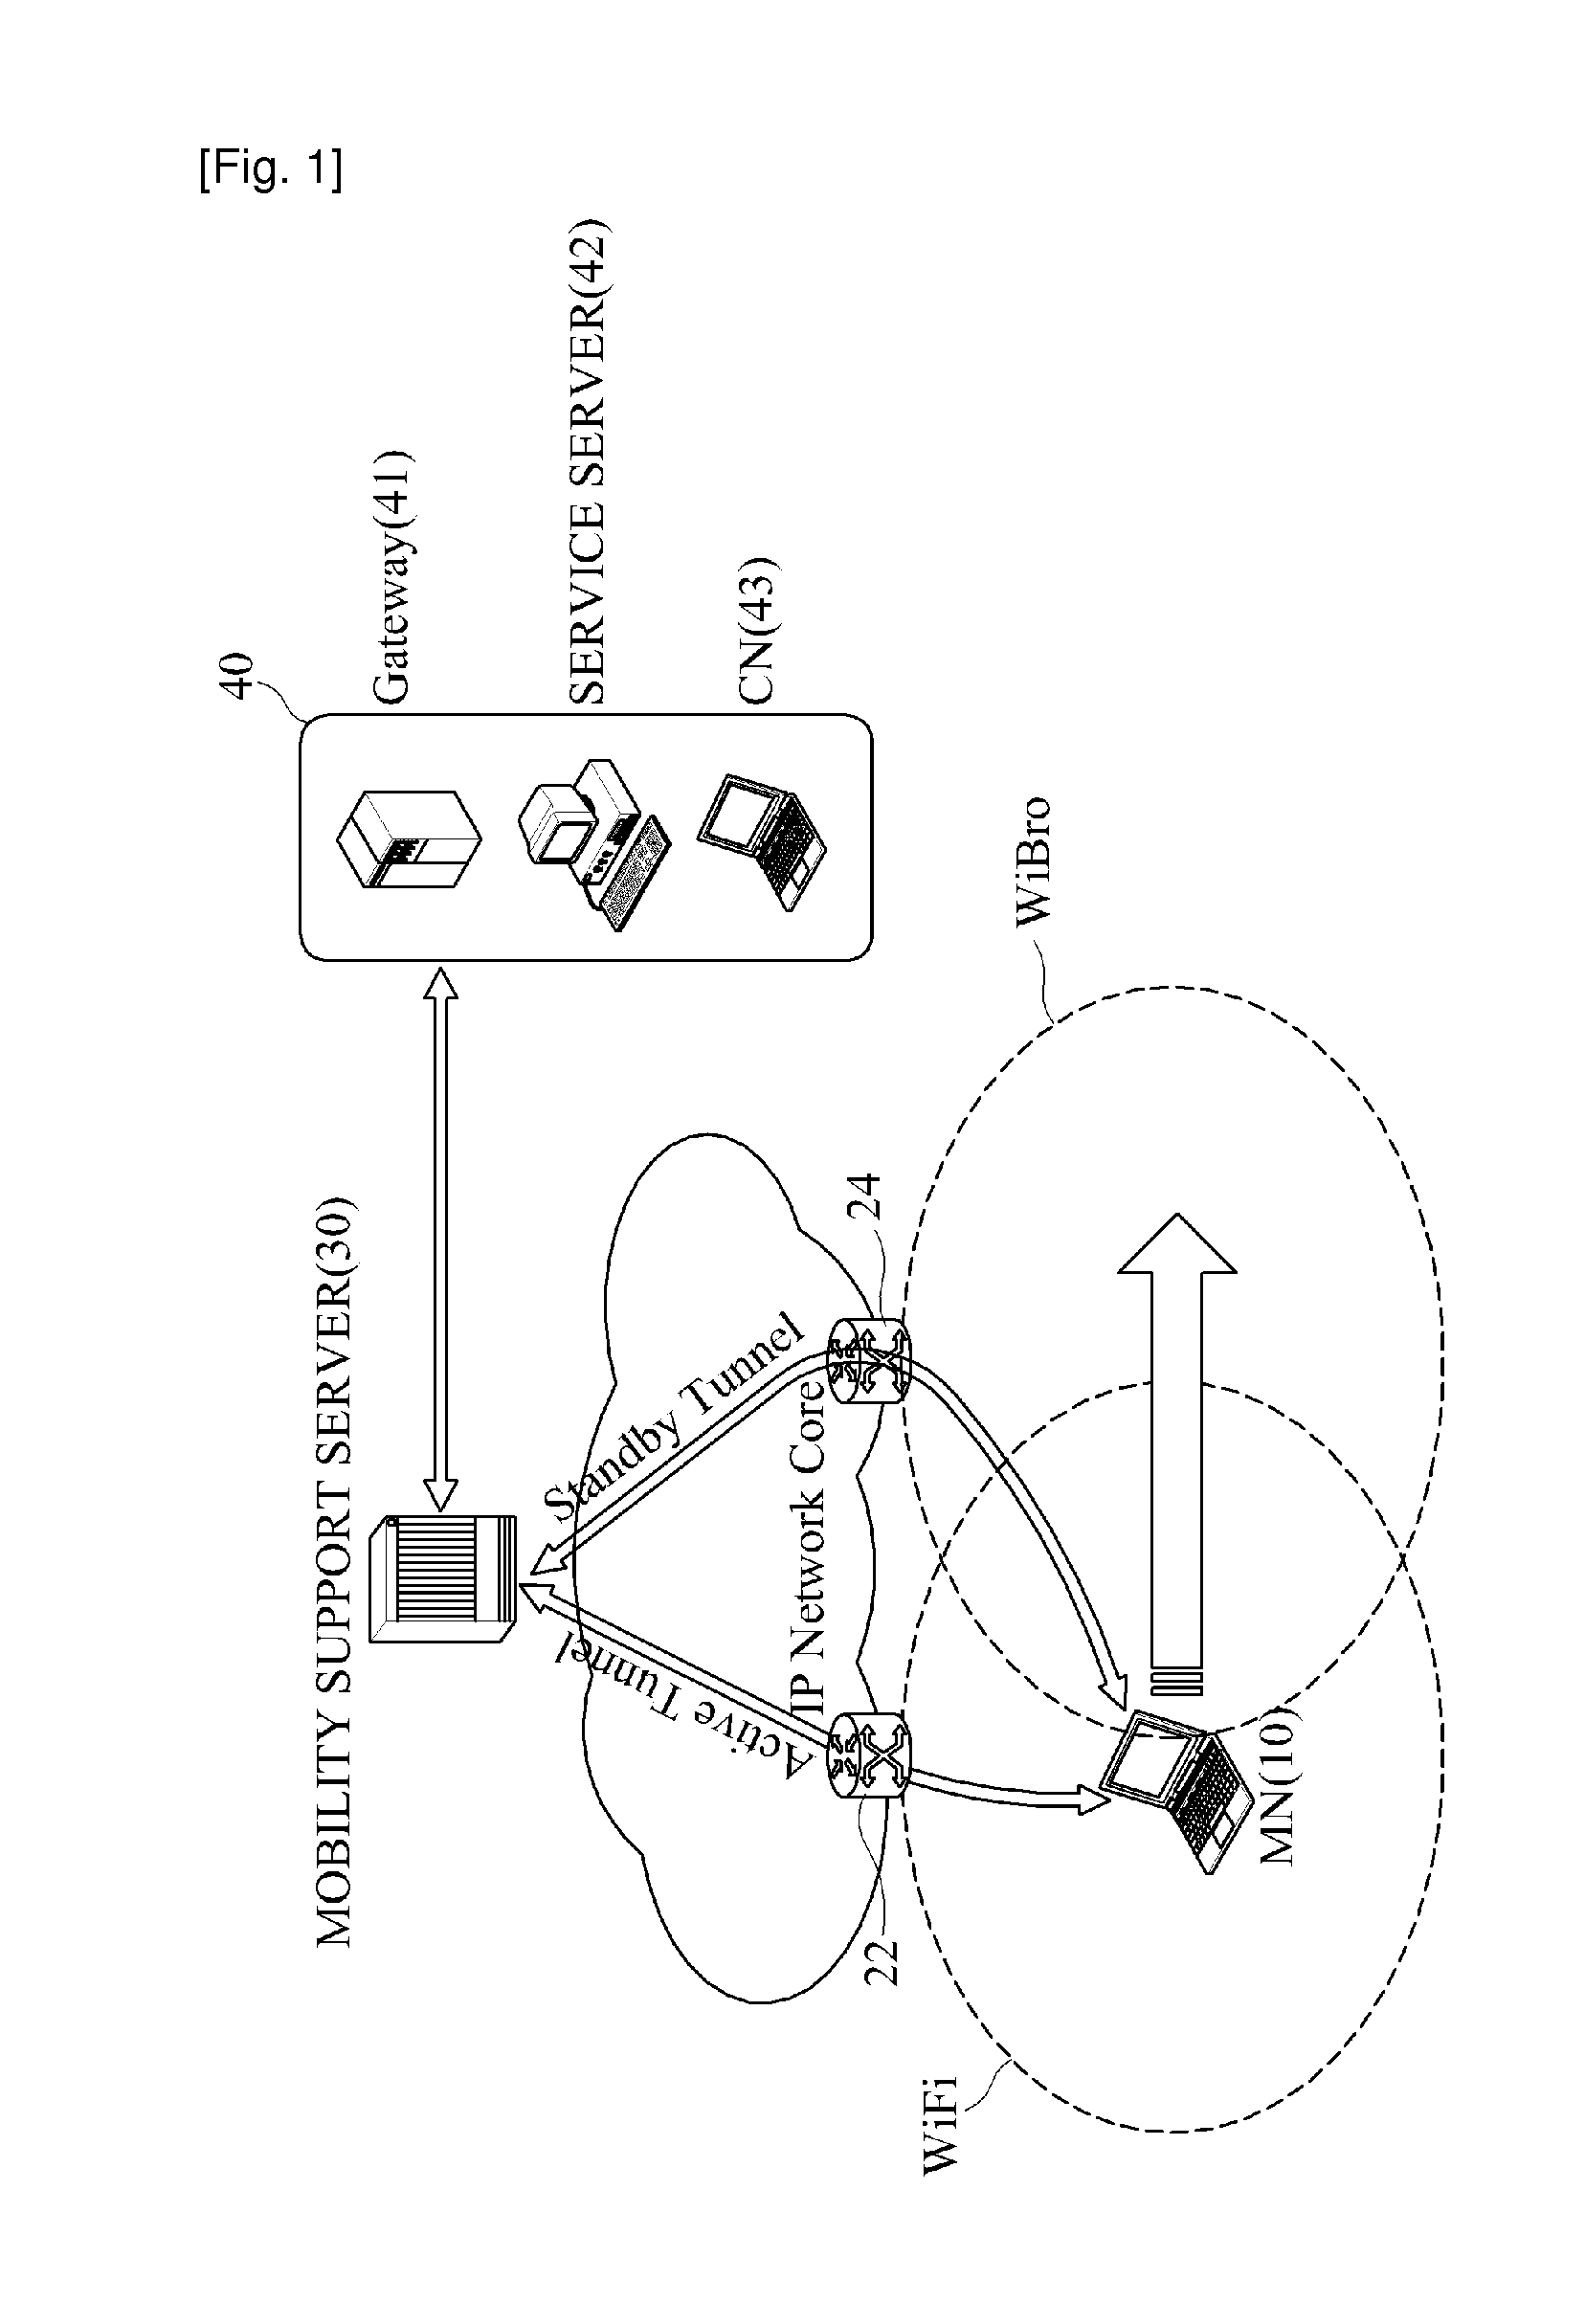 Tunneling-based mobility support equipment and method